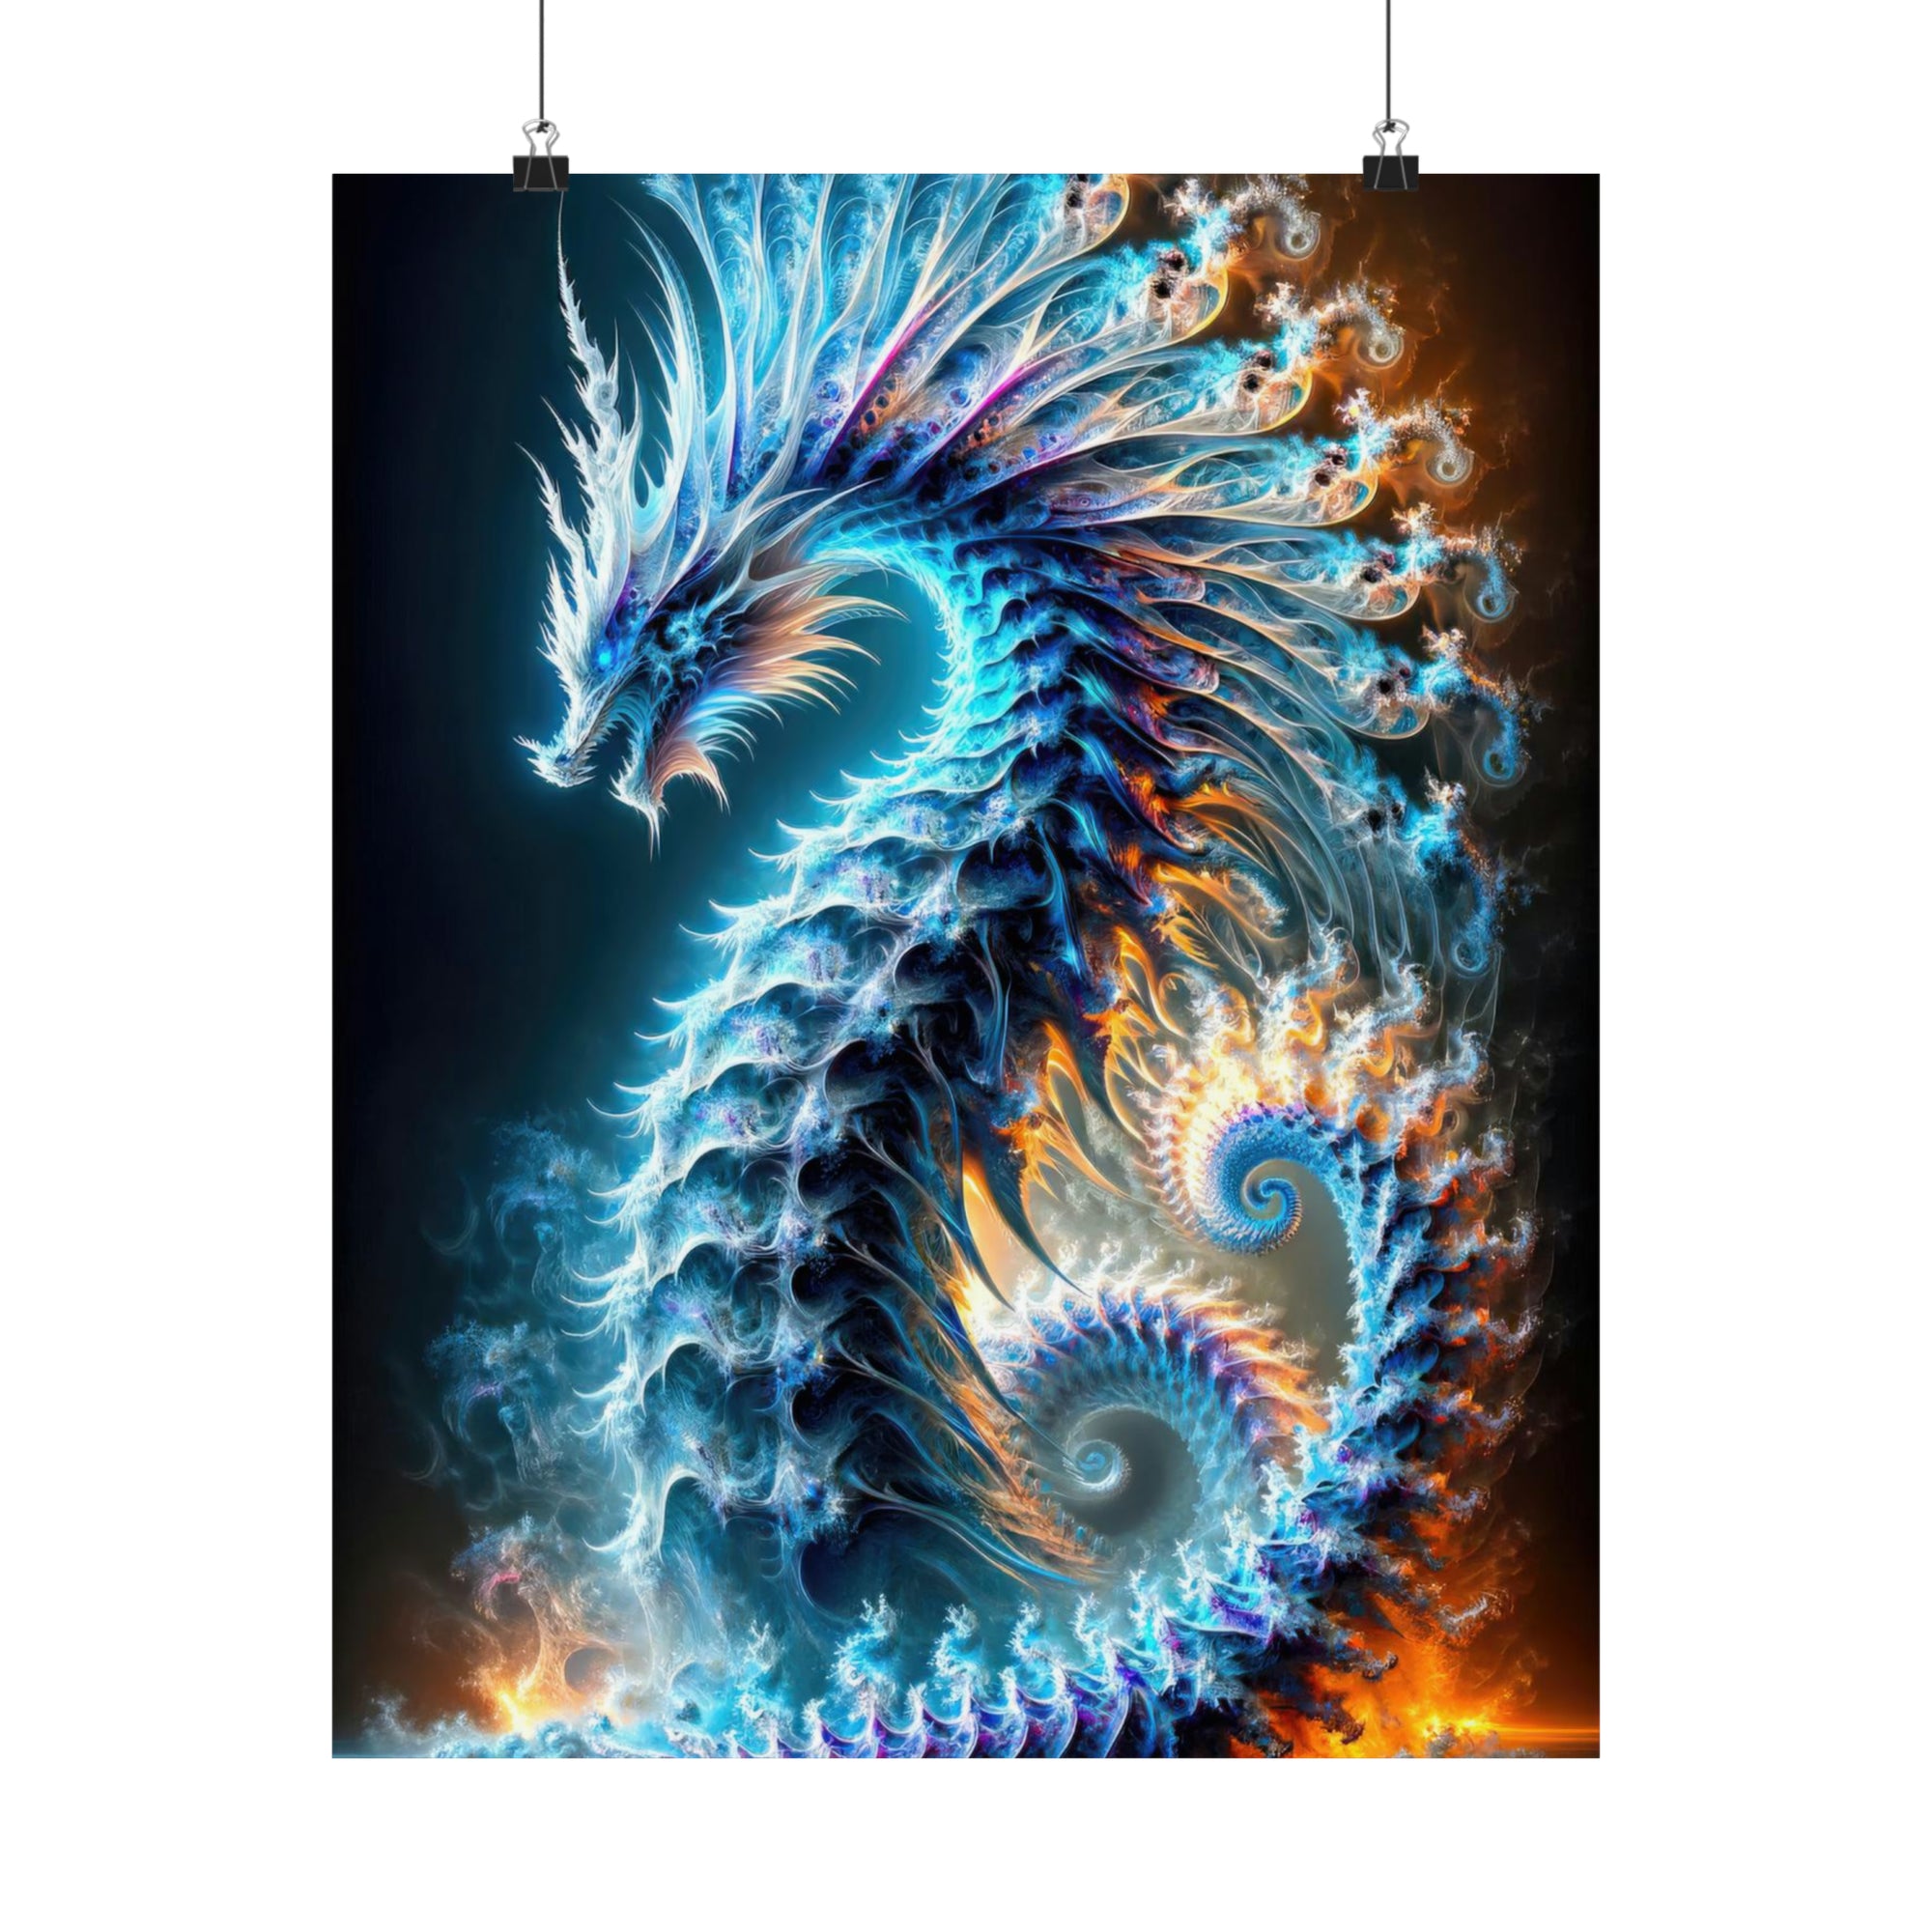 The Quantum Seraph of Fractal Fjords Poster